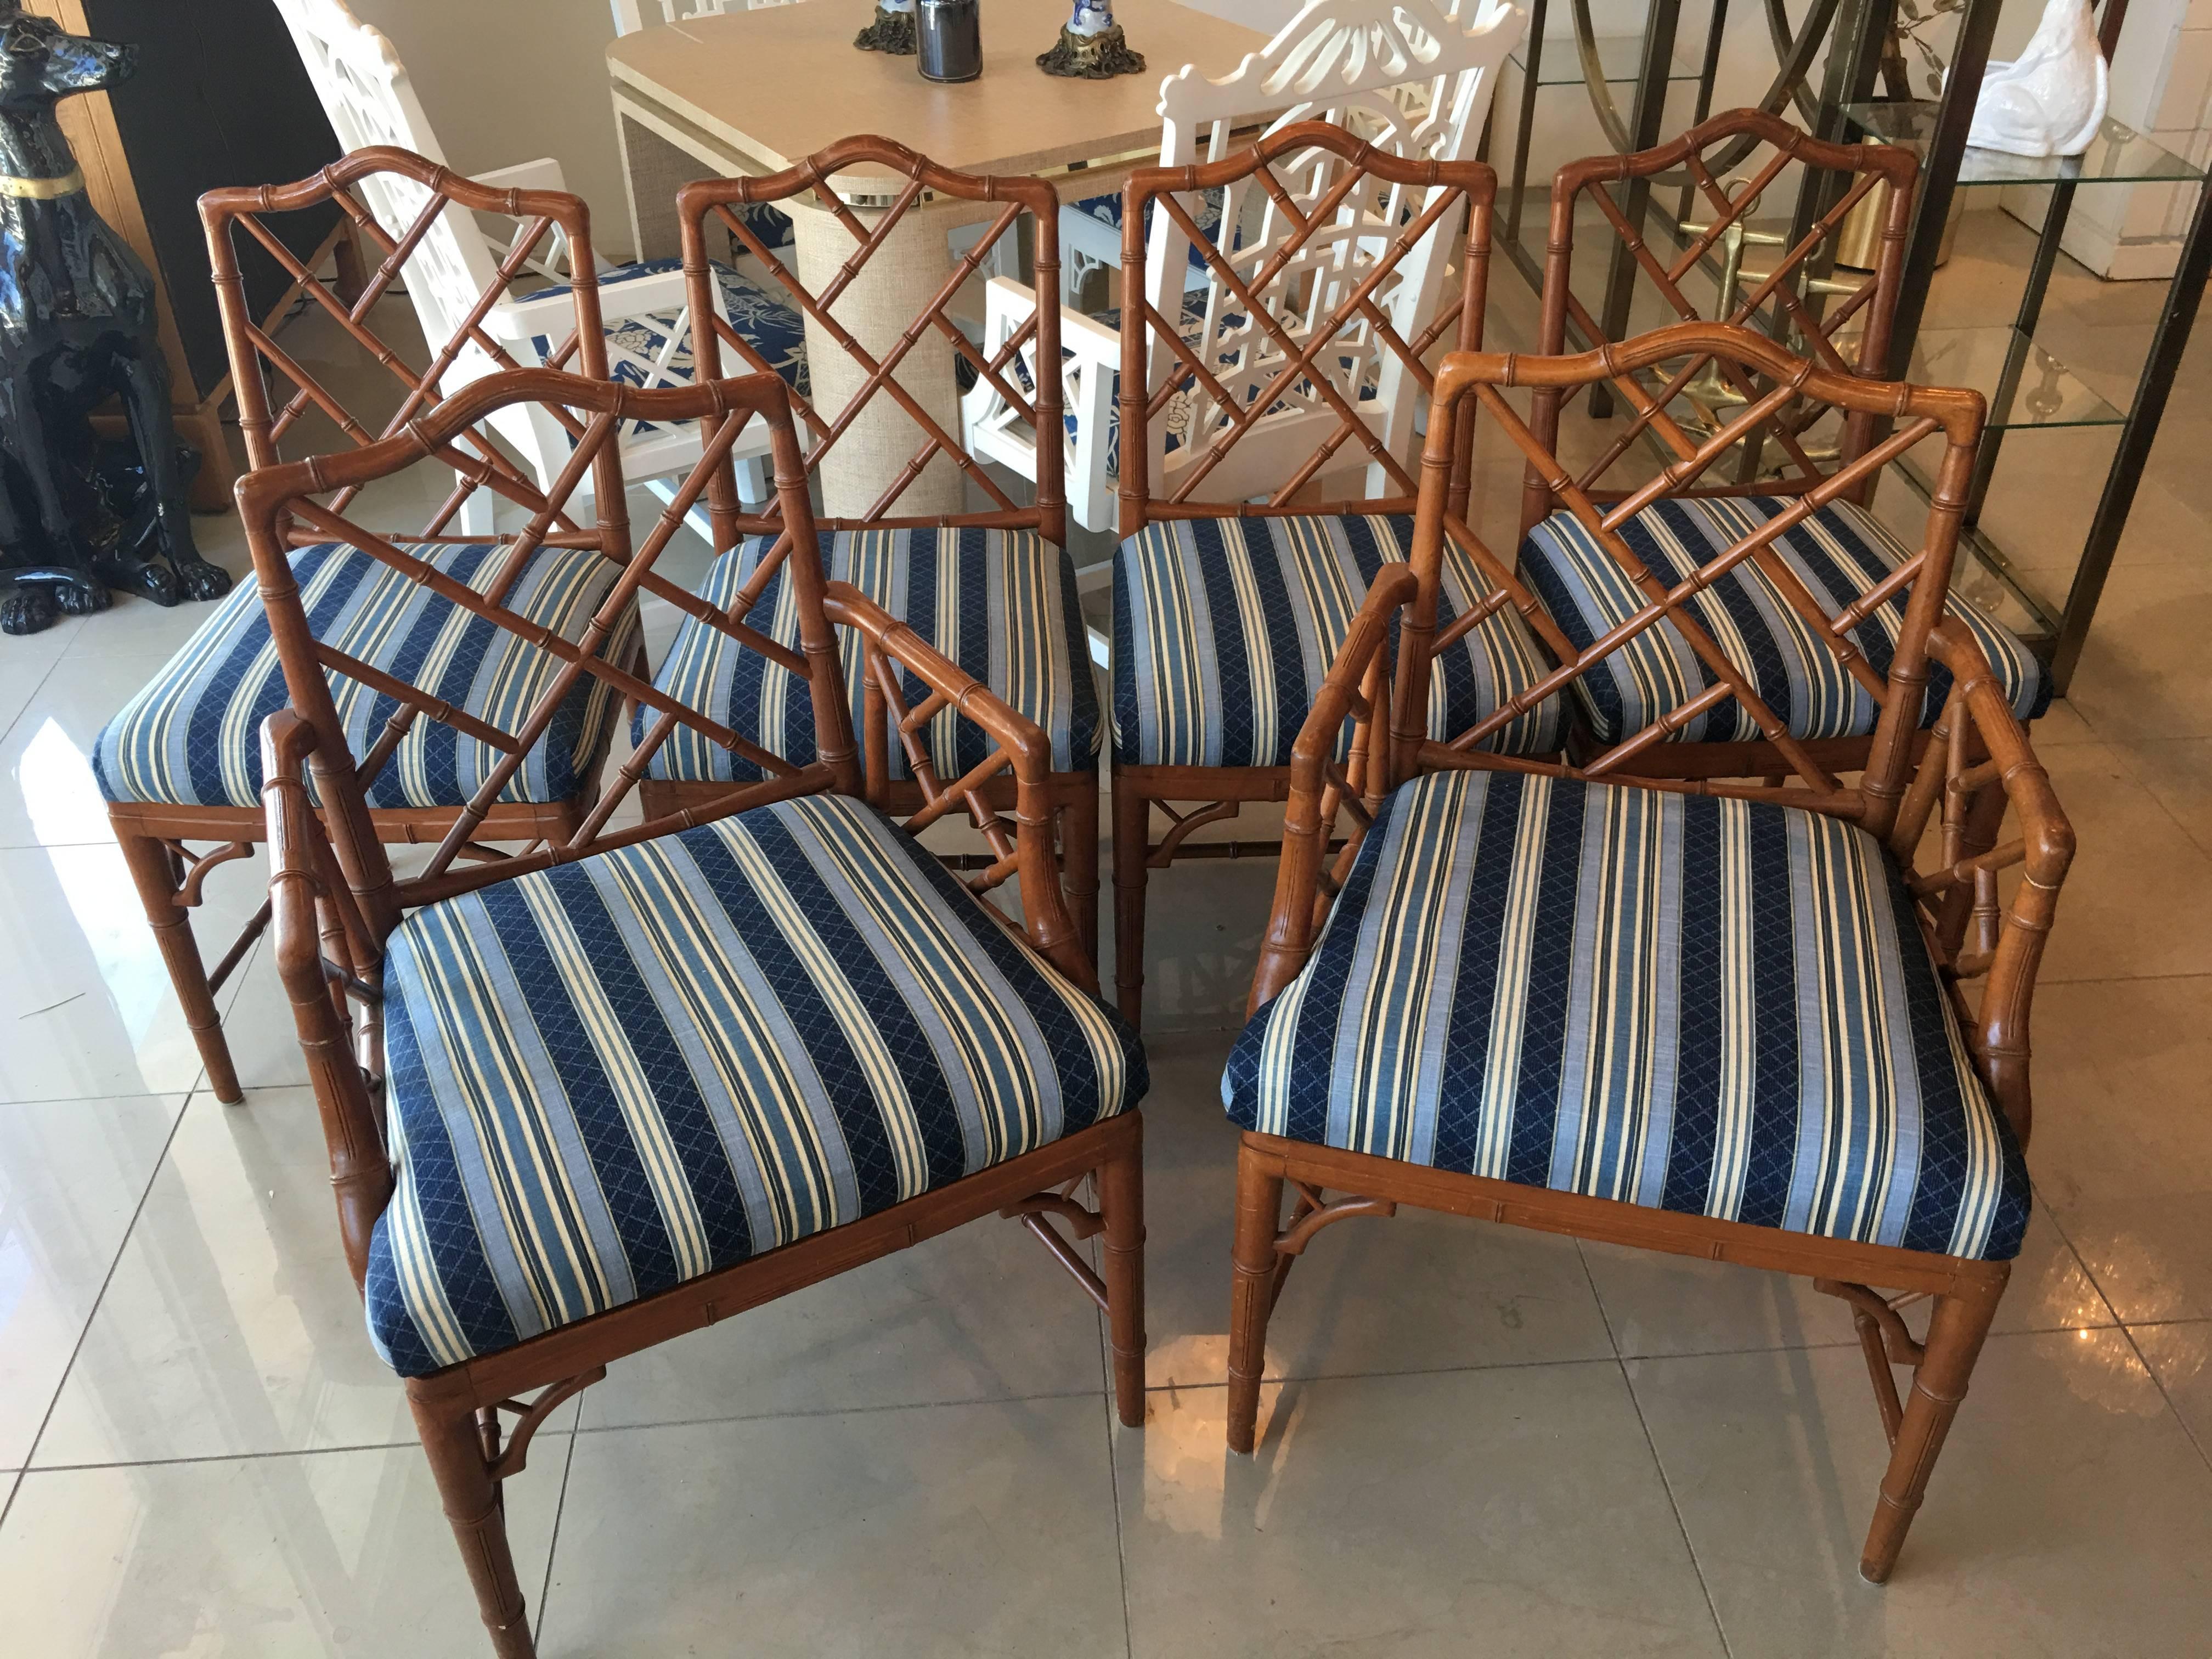 Lovely set of six Chinese Chippendale faux bamboo dining chairs. Set includes two armchairs and four side chairs. Original finish with some scuffs and scratches. Original upholstery is in great condition
Armchairs measures 36 tall x 25 wide x 19.50